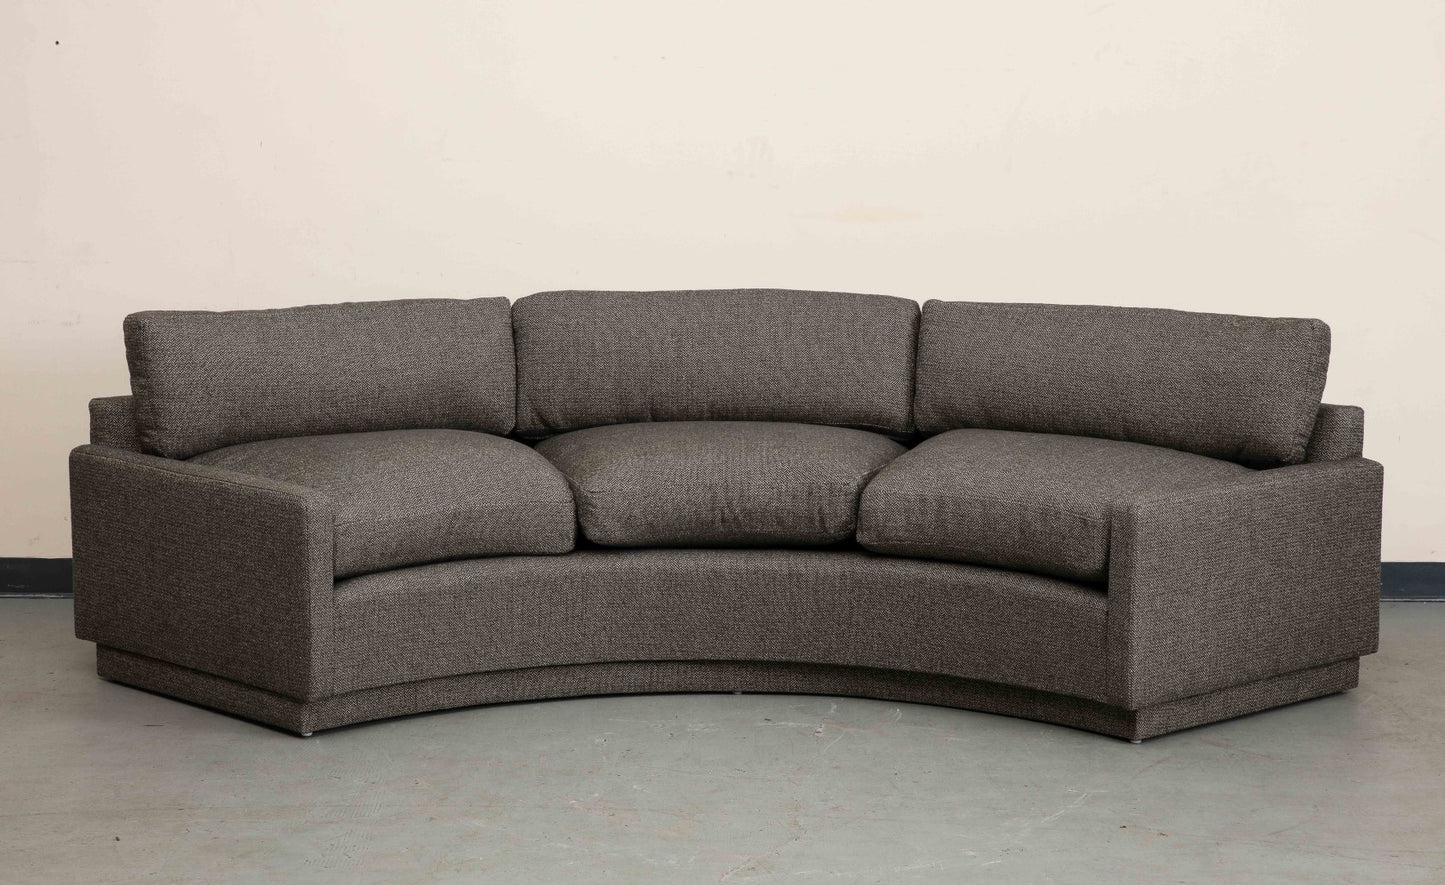 Milo Baughman Curved Three Seat Sofa, 1970, Newly Upholstered in Cotton Linen